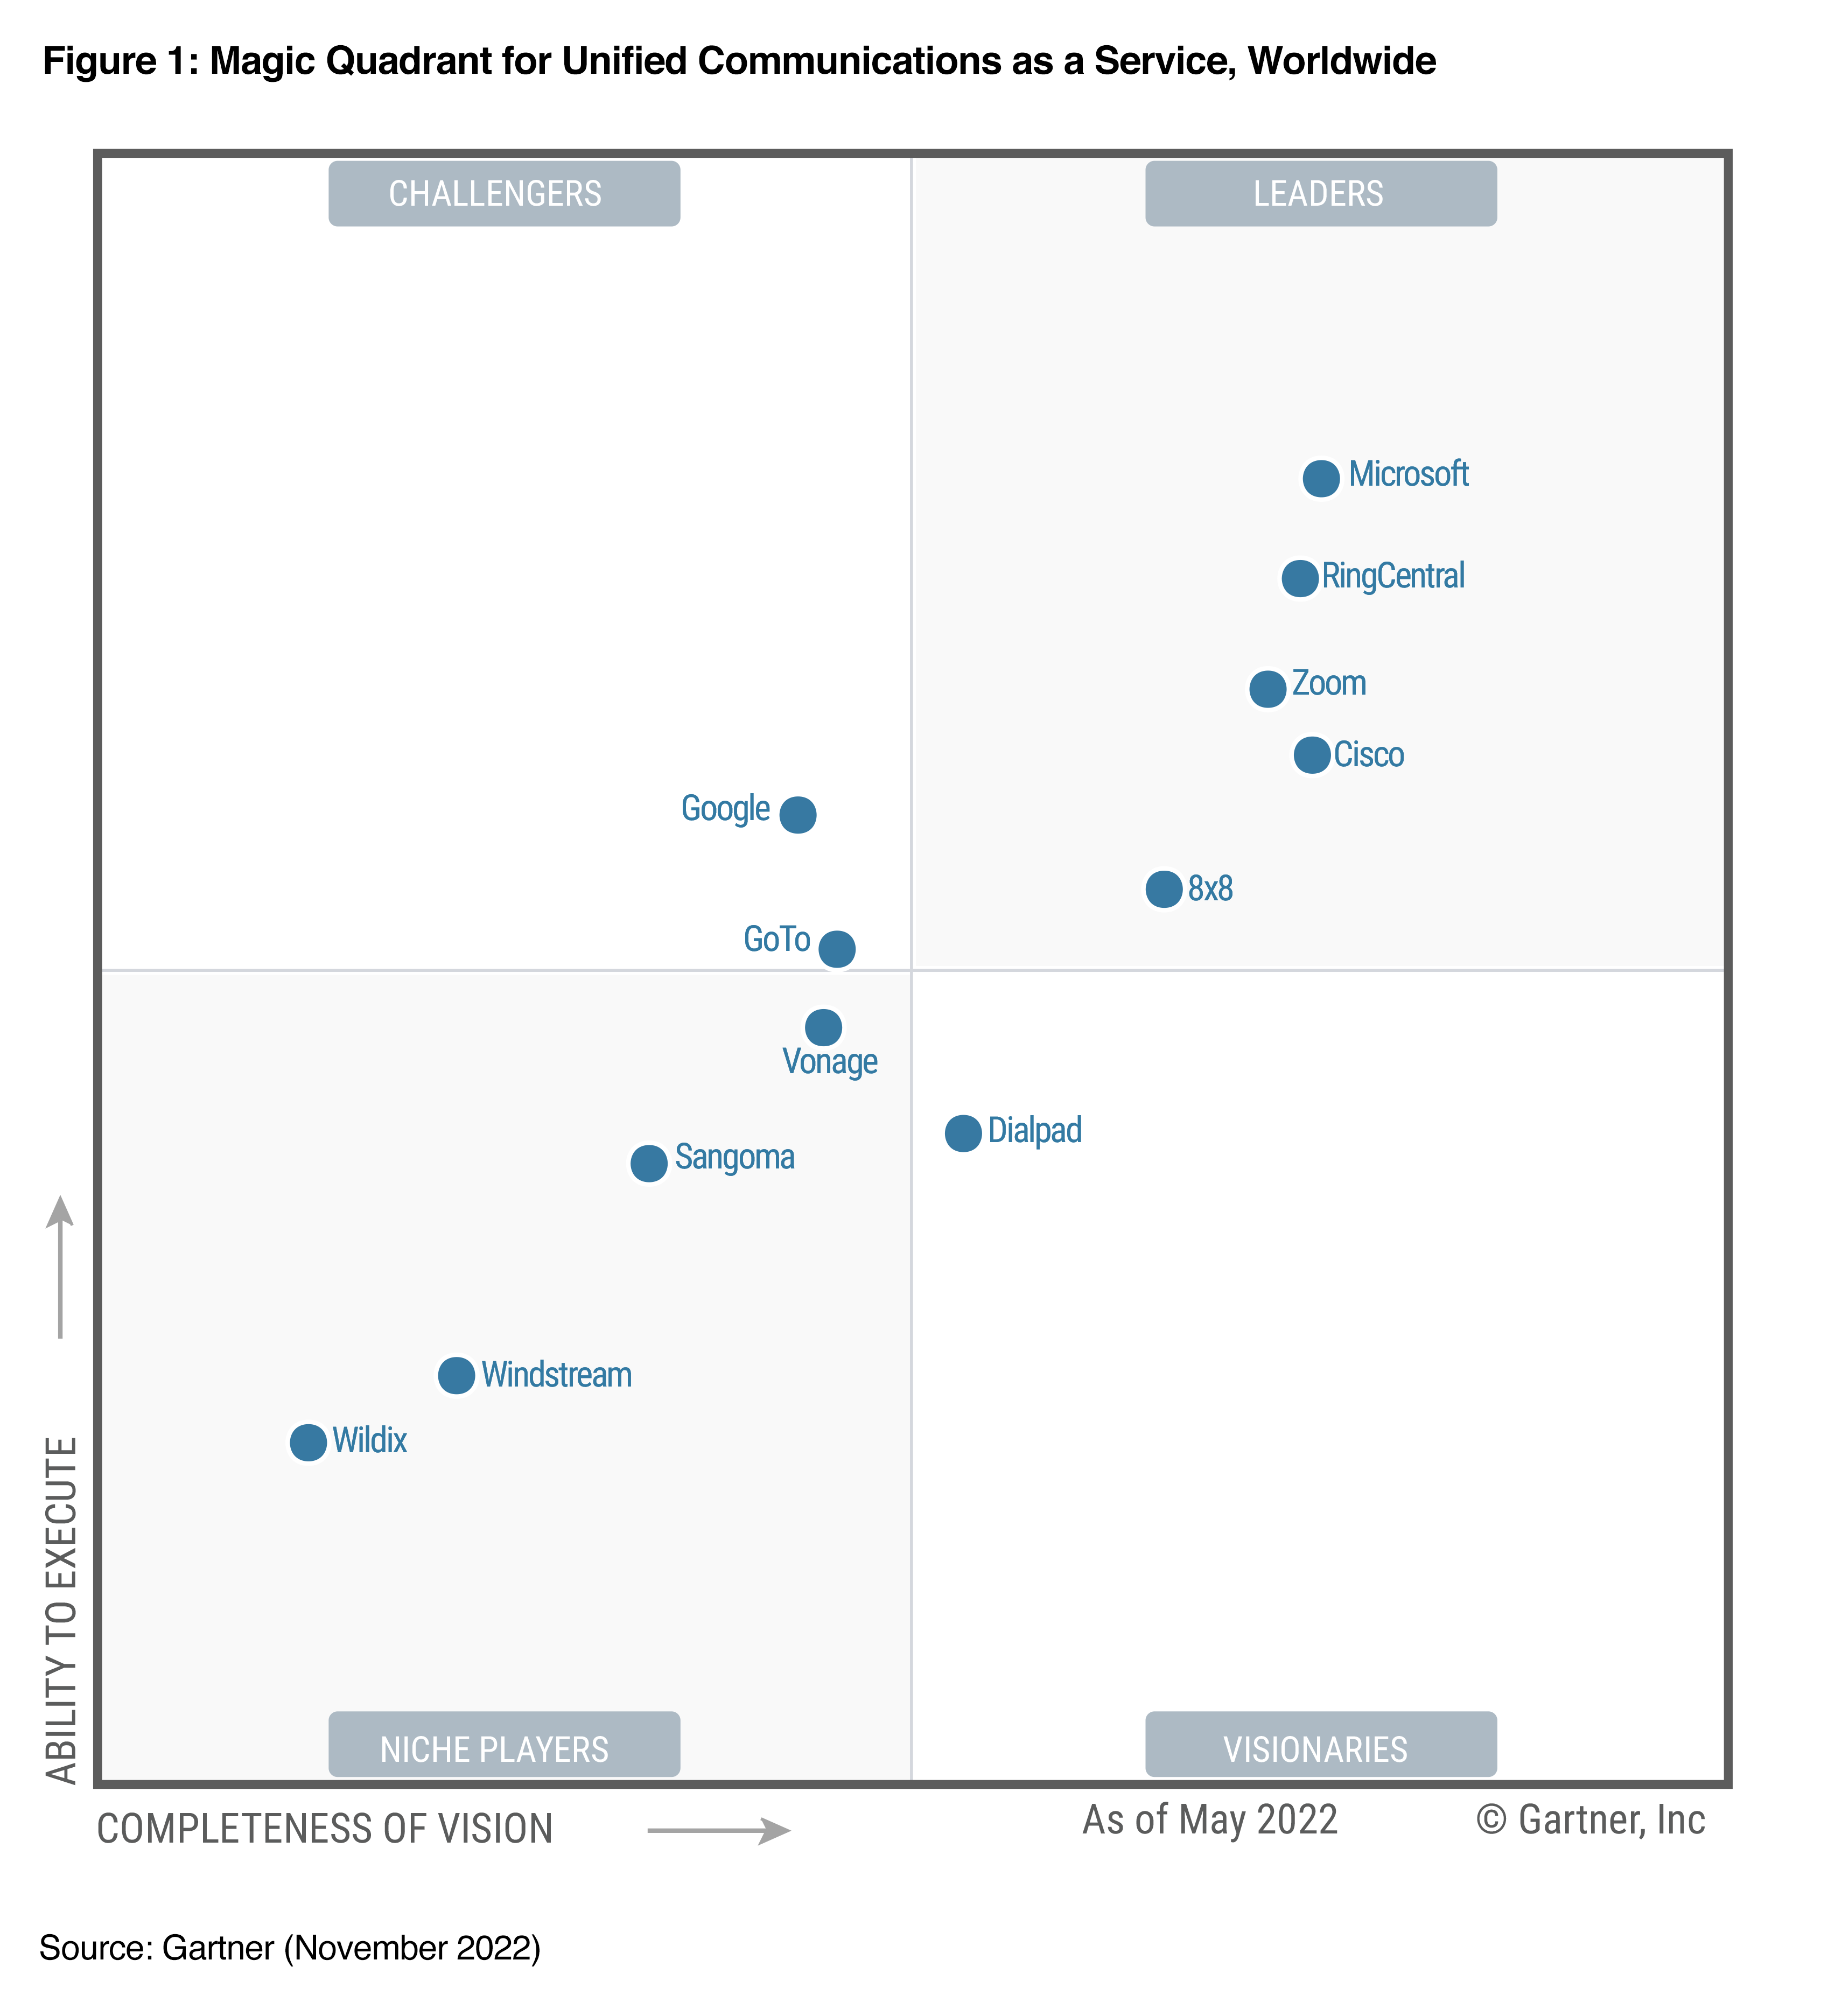 Gartner’s Magic Quadrant for unified communications as a service places Webex by Cisco in a leader position for the fourth consecutive year.